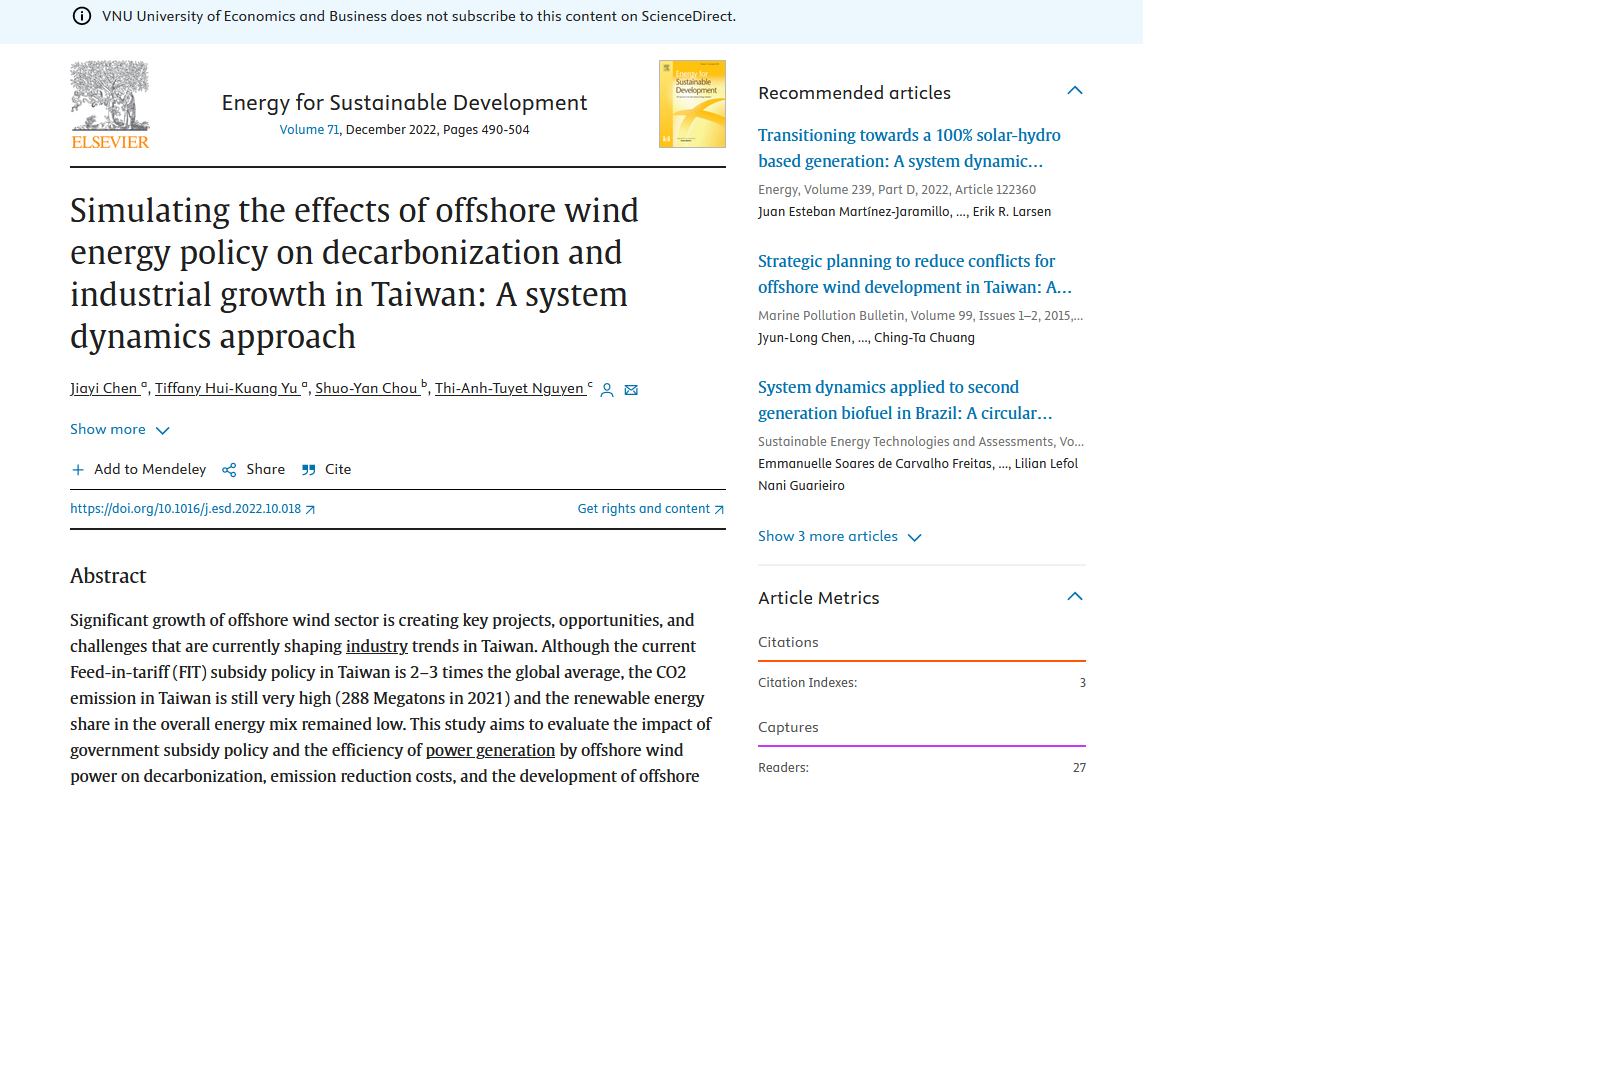 Simulating the Effects of Offshore Wind Energy Policy on Decarbonization and Industrial Growth in Taiwan: A System Dynamics Approach